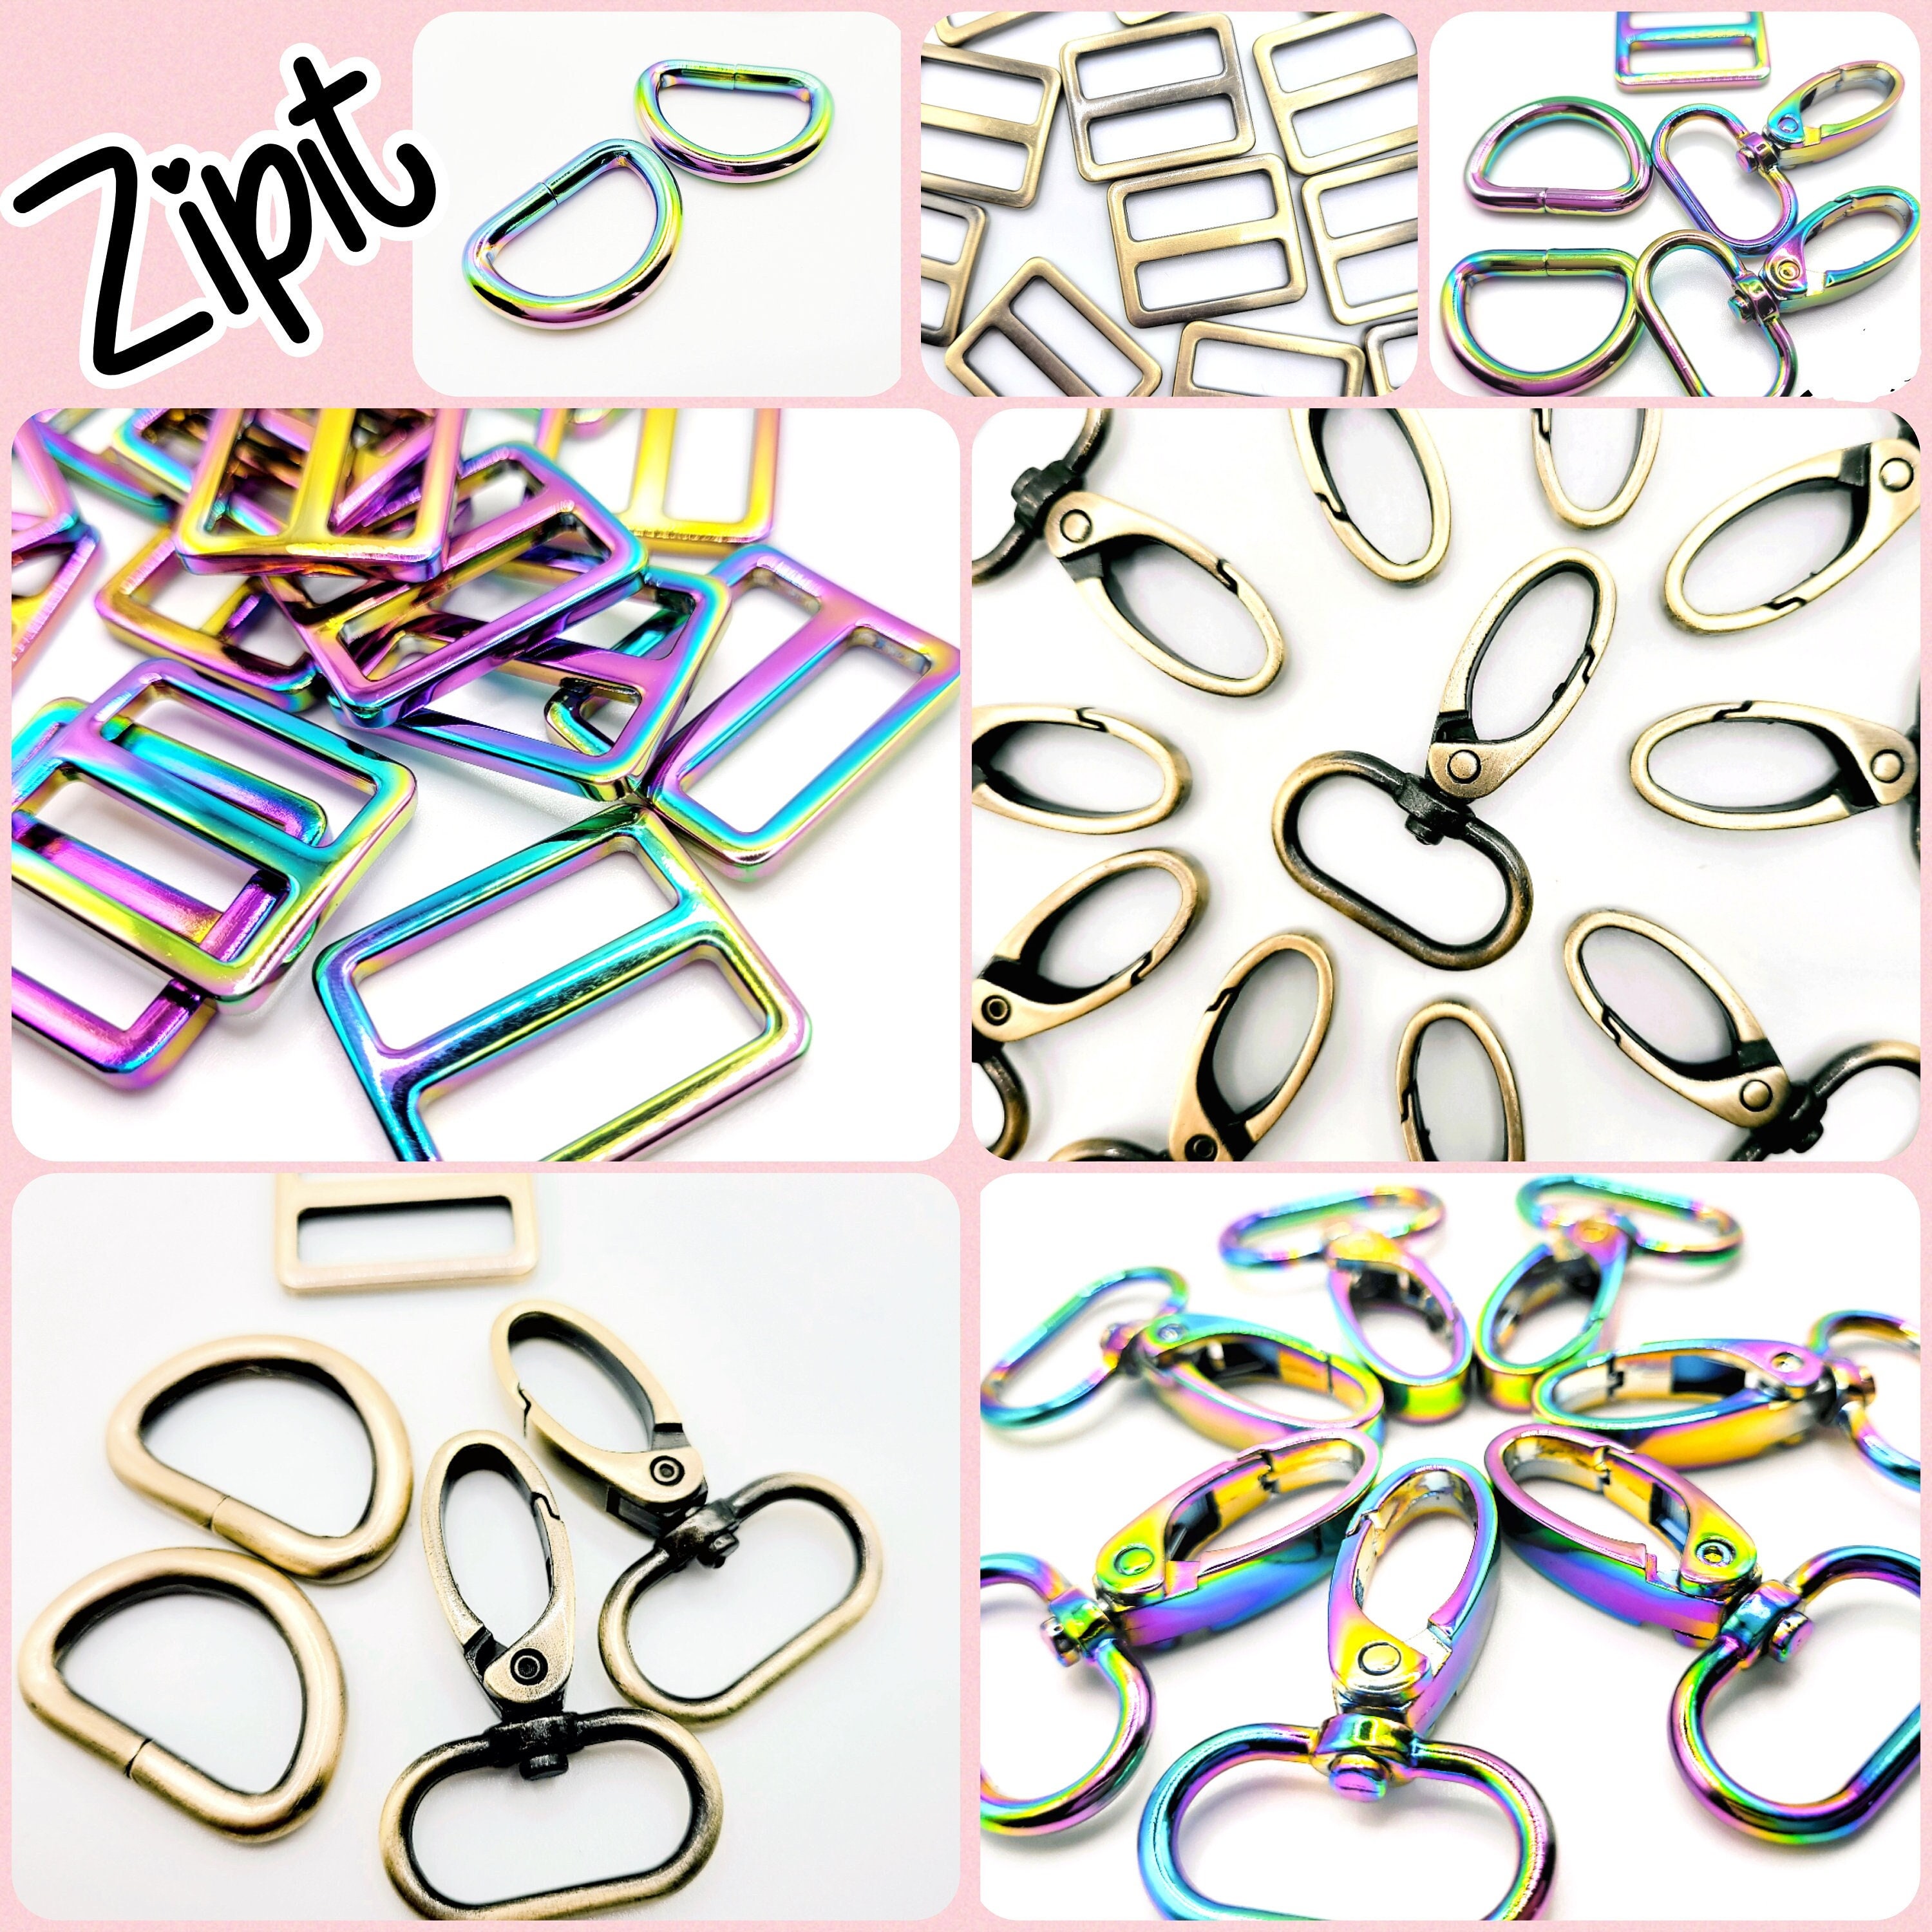 Purse Hardware 1 and 1.5 Inch D Rings, Tri-glides, and Swivel Hooks in  Rainbow Iridescent and Antique Brass -  Canada